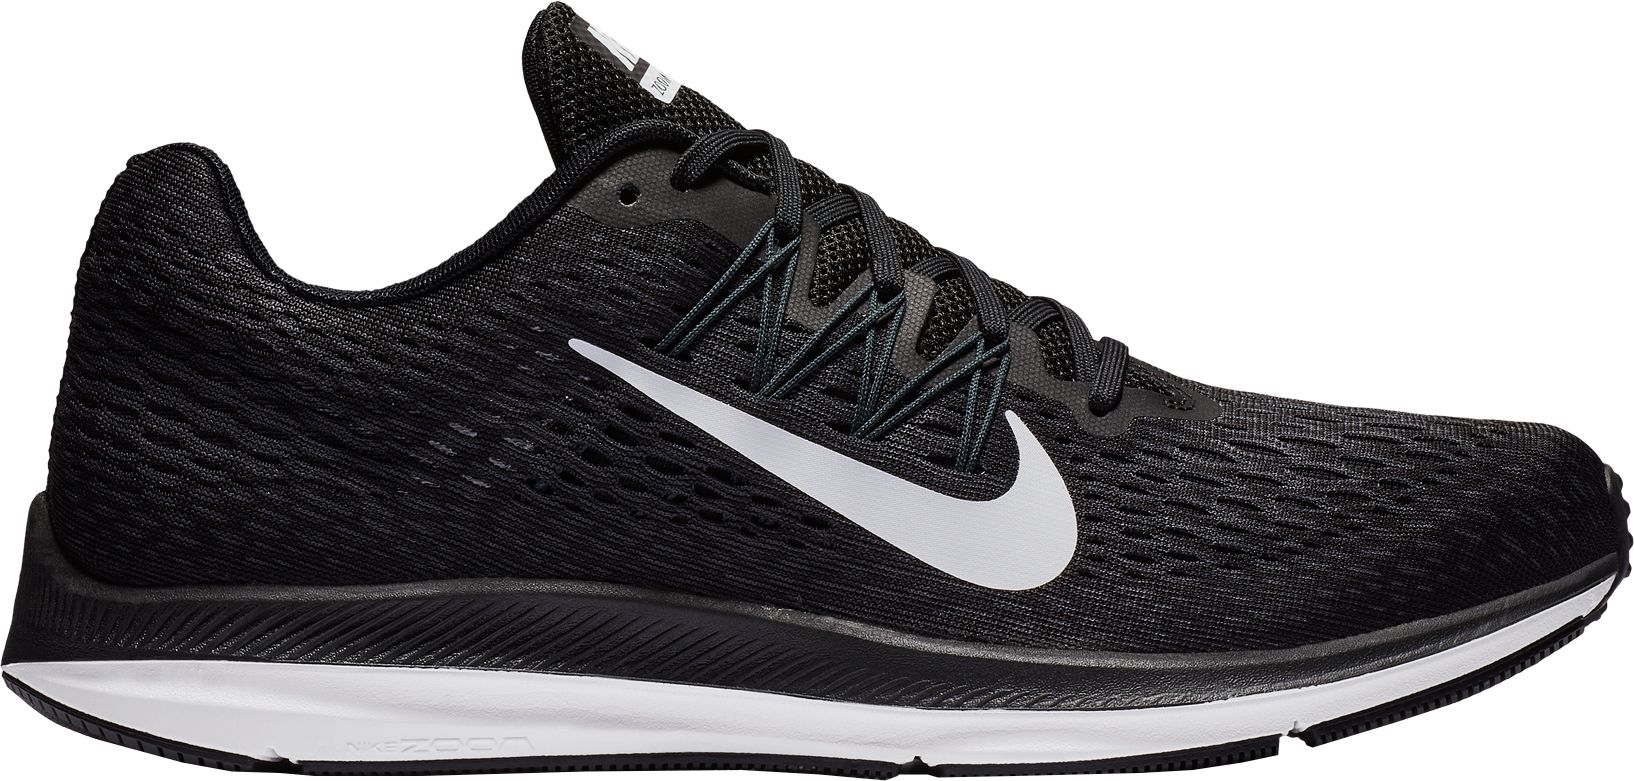 Nike Men's Air Zoom Winflo 5 Running Shoes | DICK'S Sporting Goods